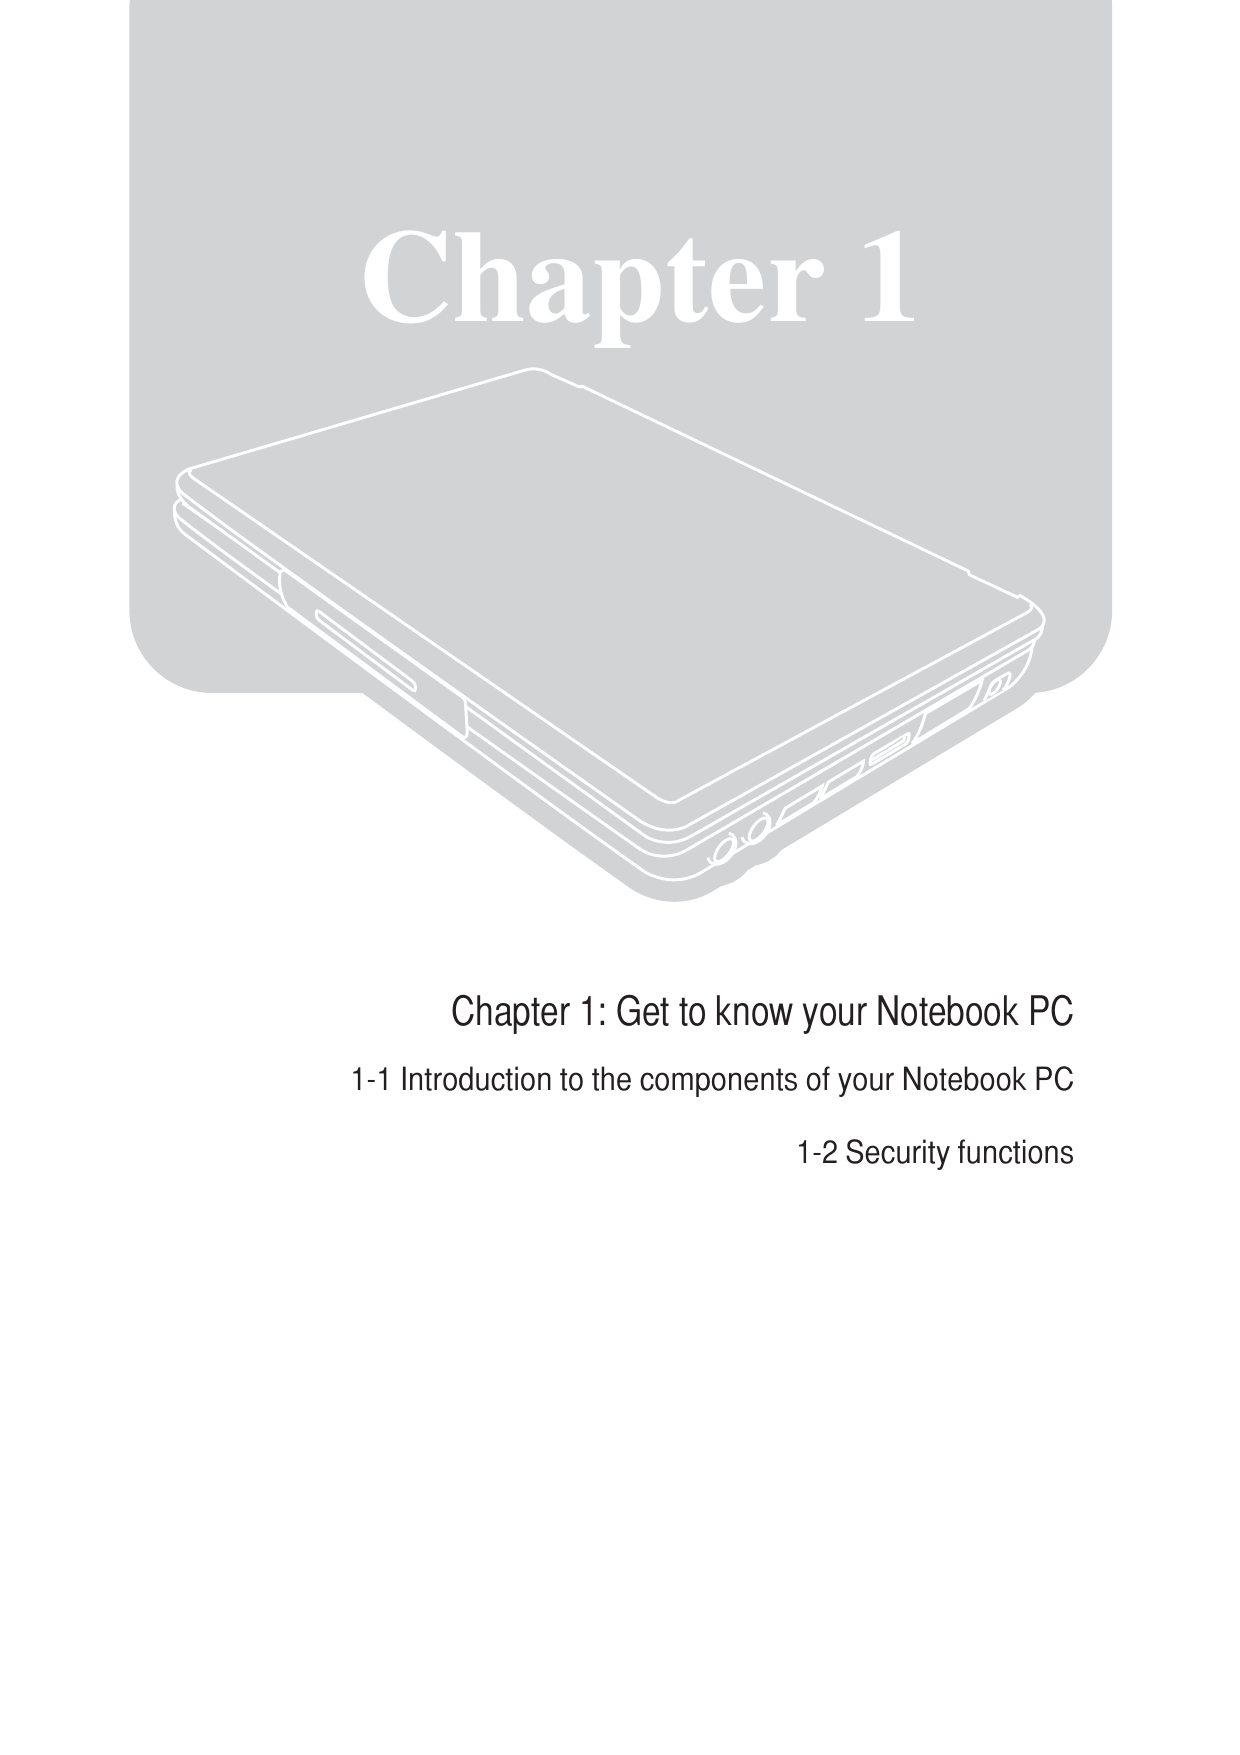 Chapter 1: Get to know your Notebook PC1-1 Introduction to the components of your Notebook PC1-2 Security functionsChapter 1